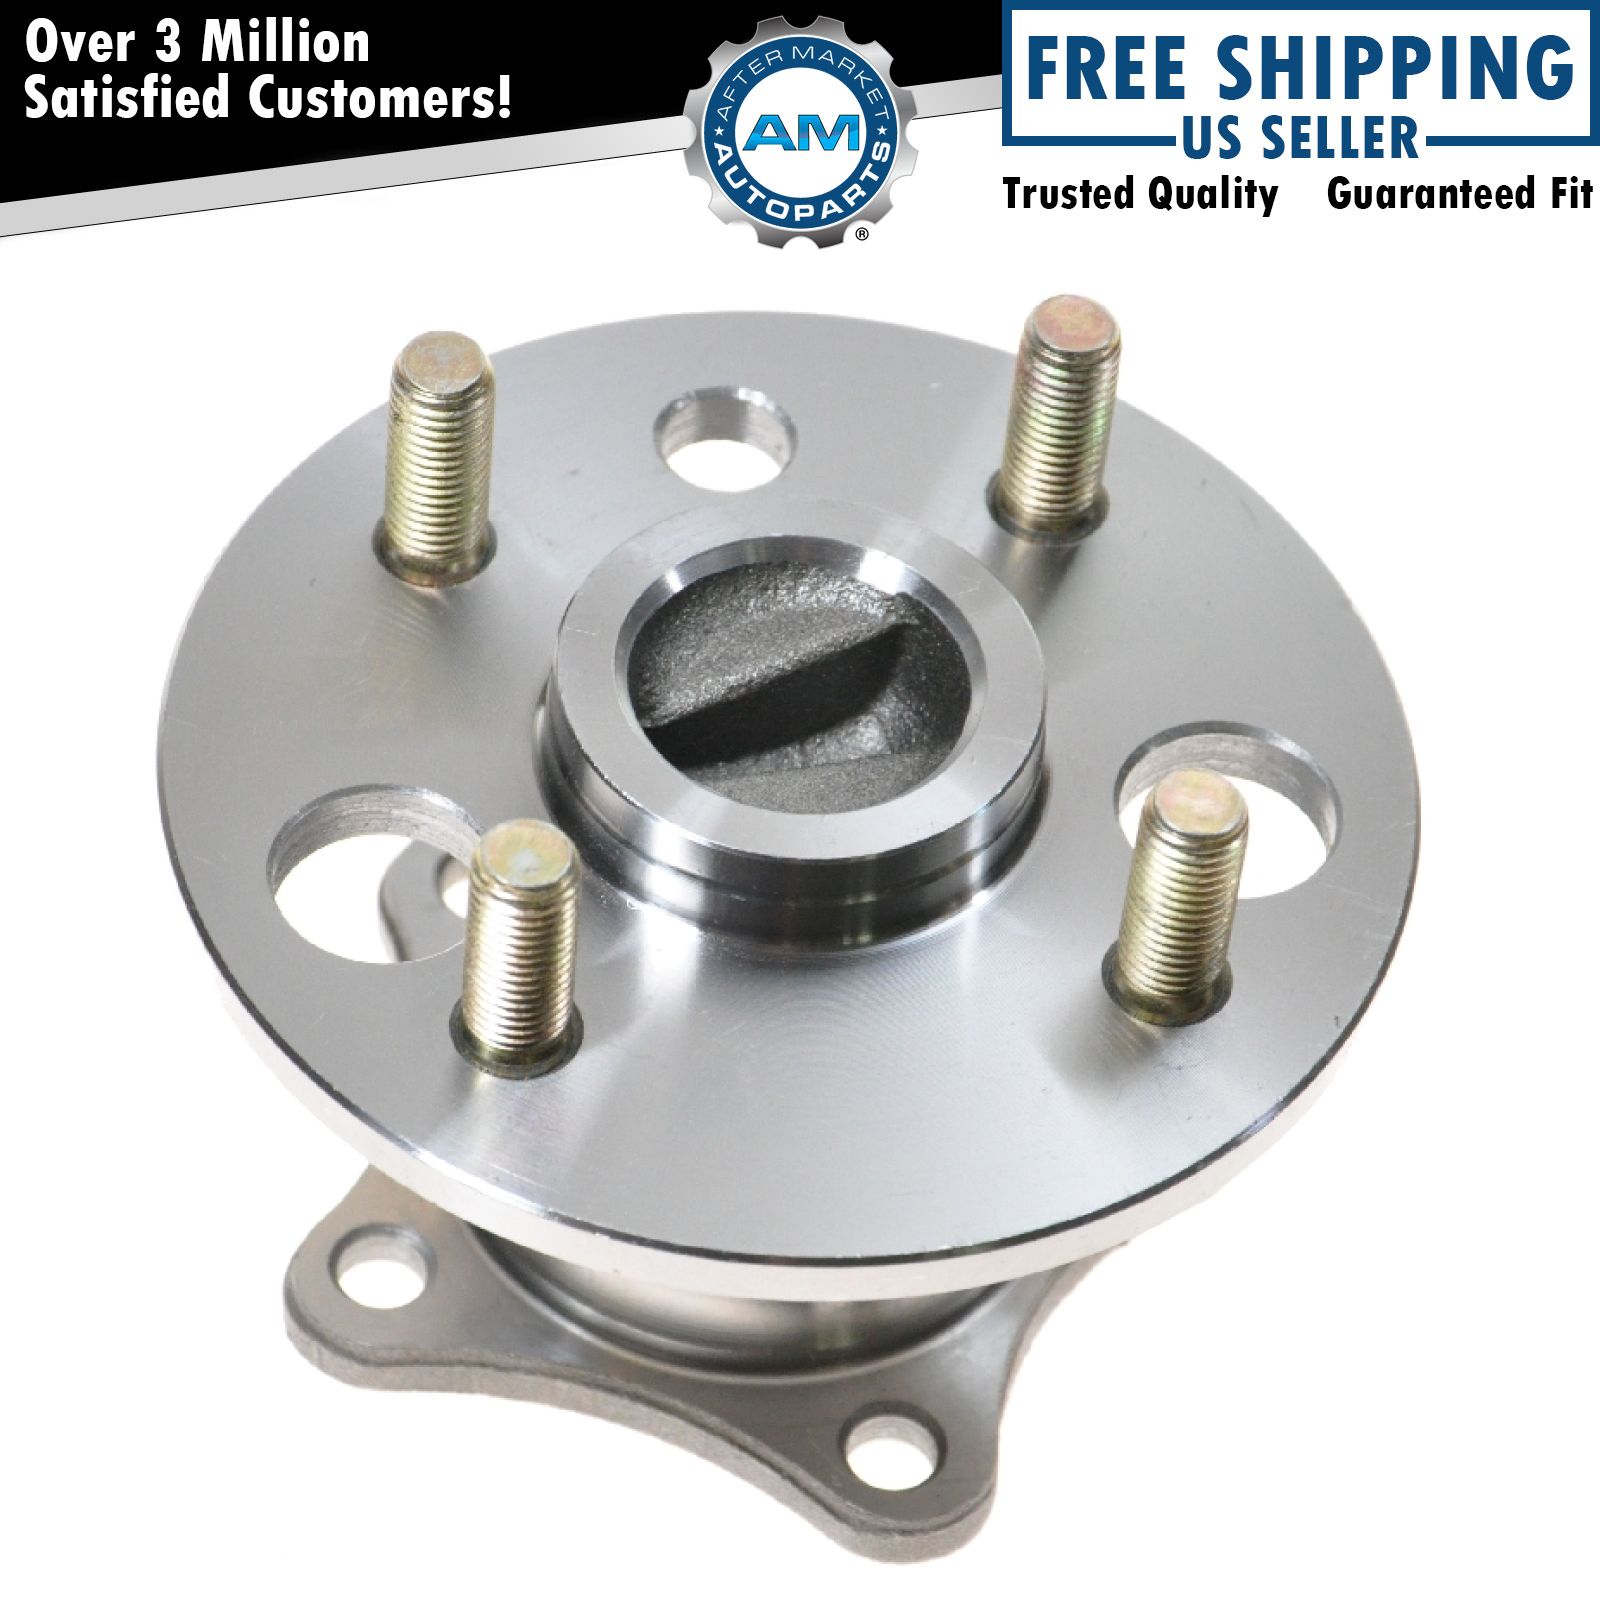 Rear Wheel Hub & Bearing Assembly for Toyota Corolla Chevy Geo Prizm w/ ABS